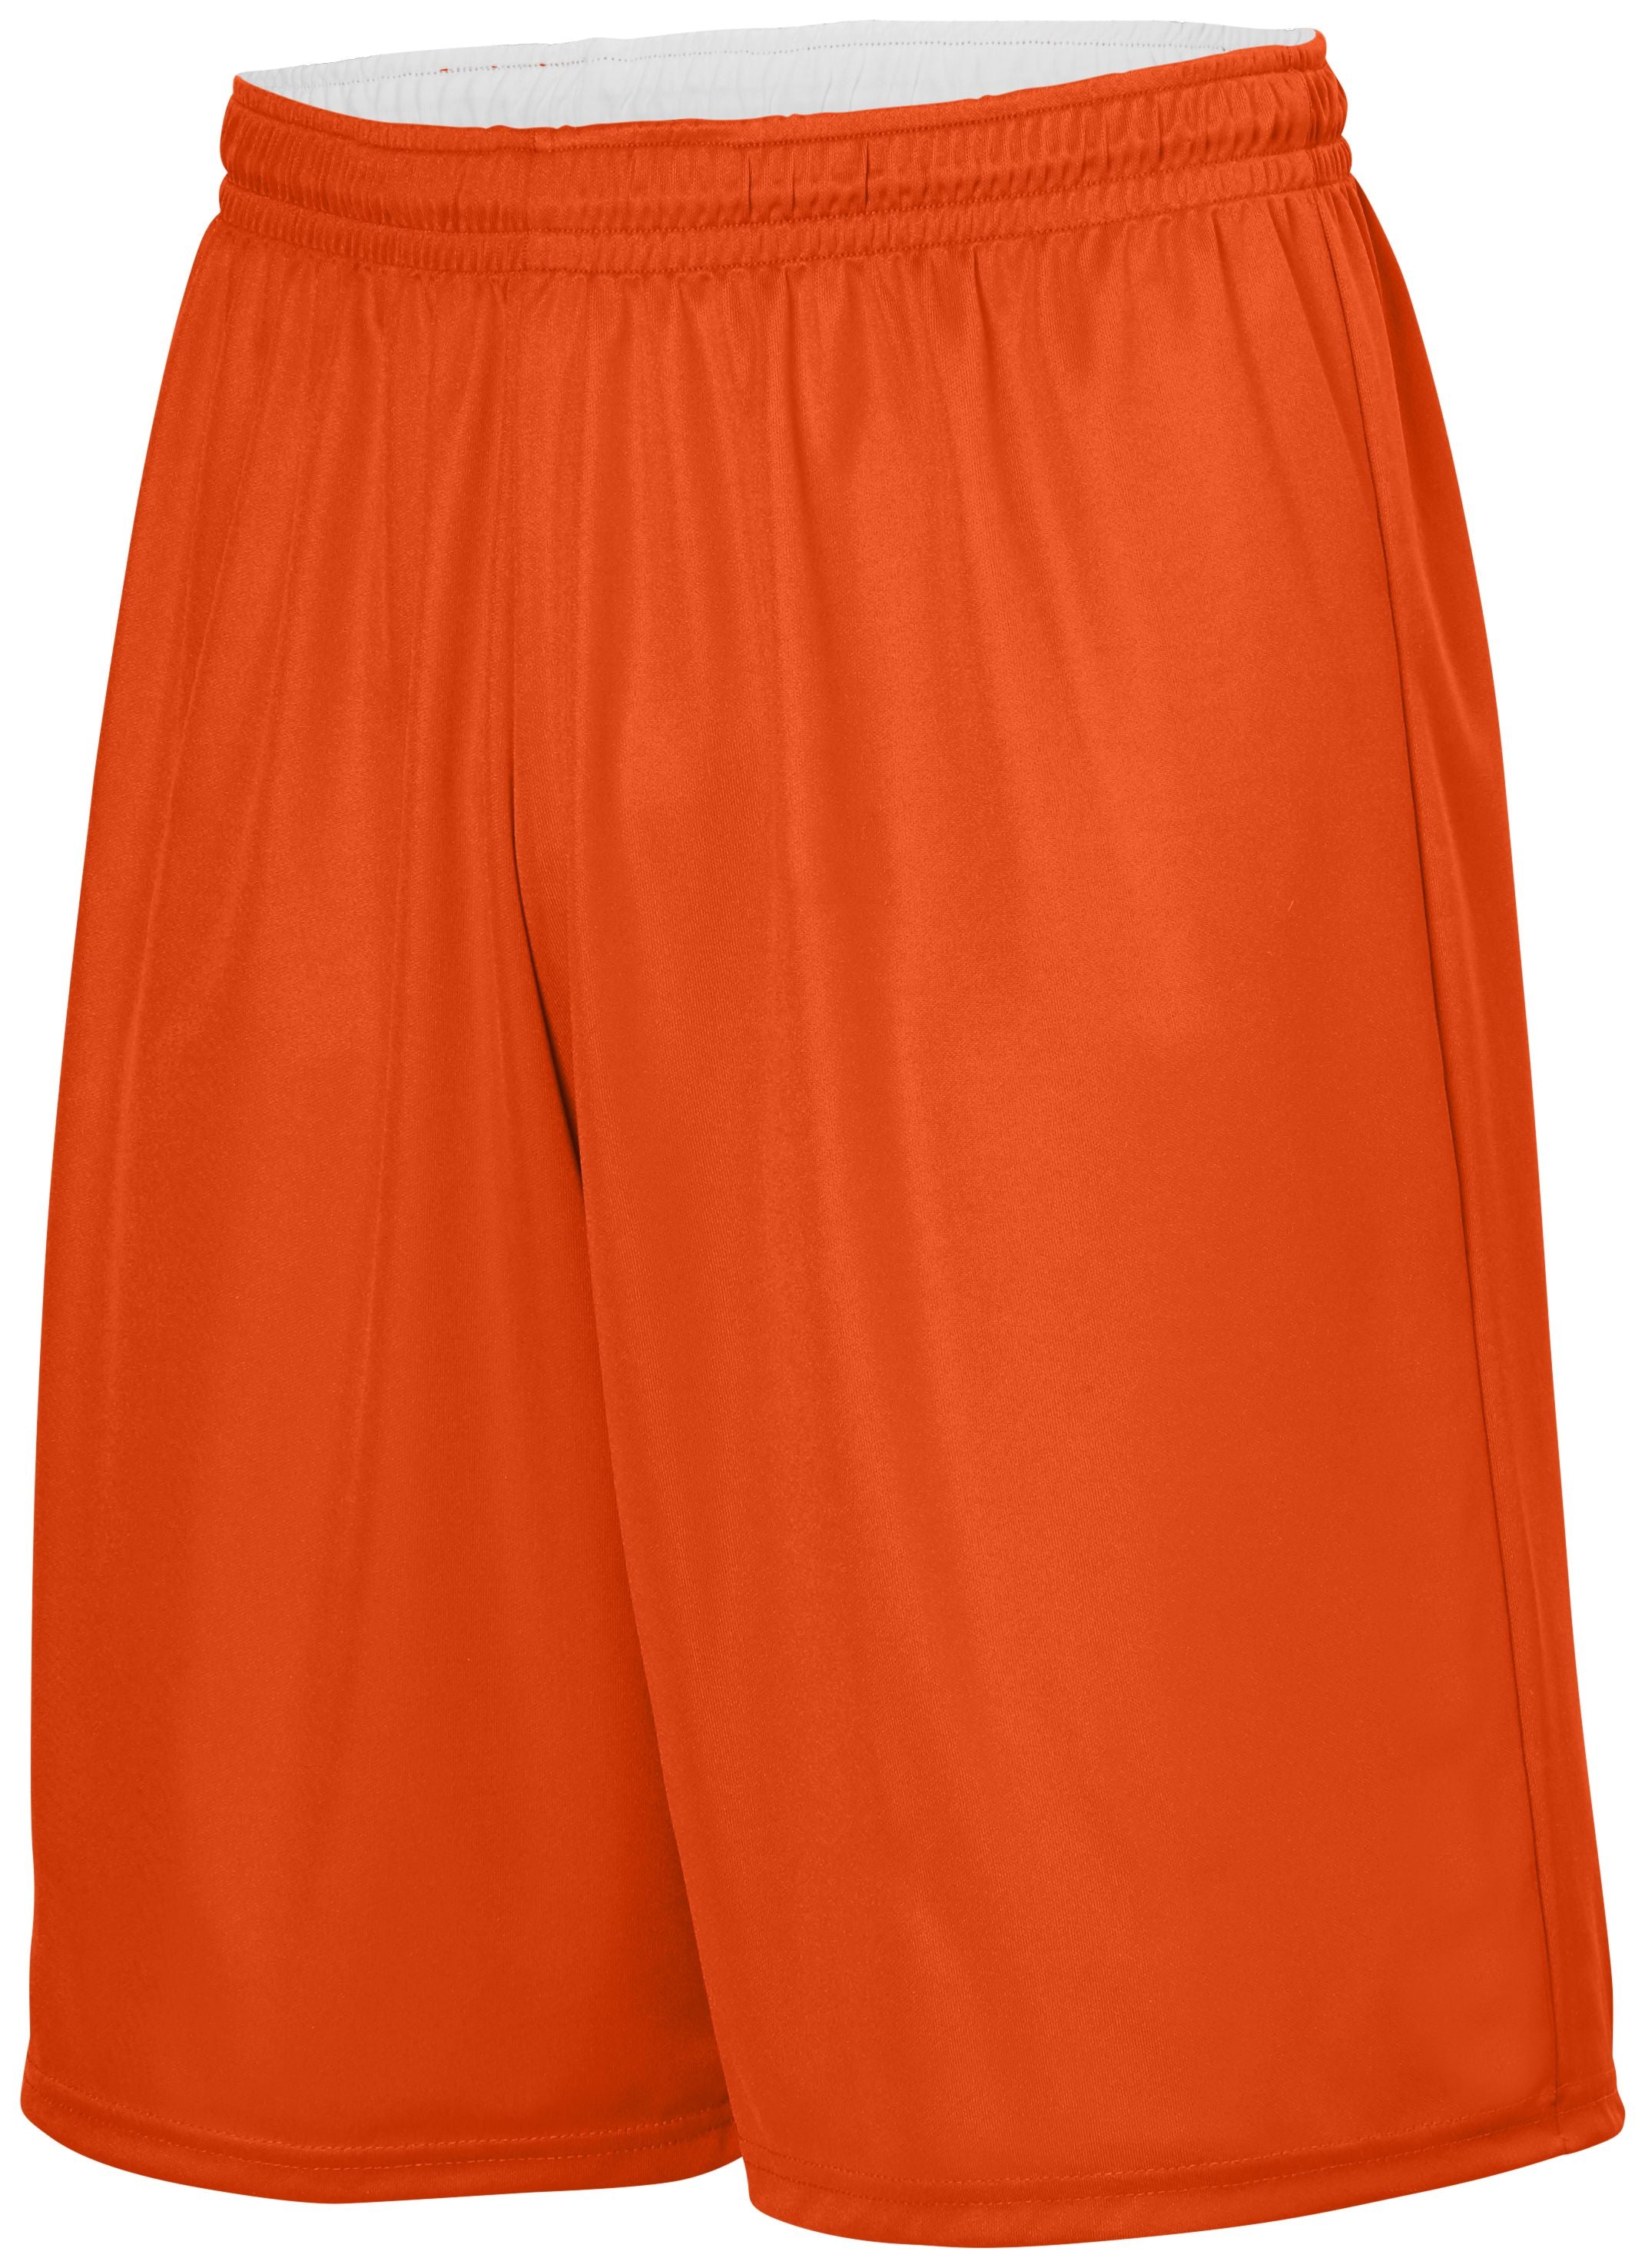 Augusta Sportswear Reversible Wicking Shorts in Orange/White  -Part of the Adult, Adult-Shorts, Augusta-Products, Basketball, All-Sports, All-Sports-1 product lines at KanaleyCreations.com